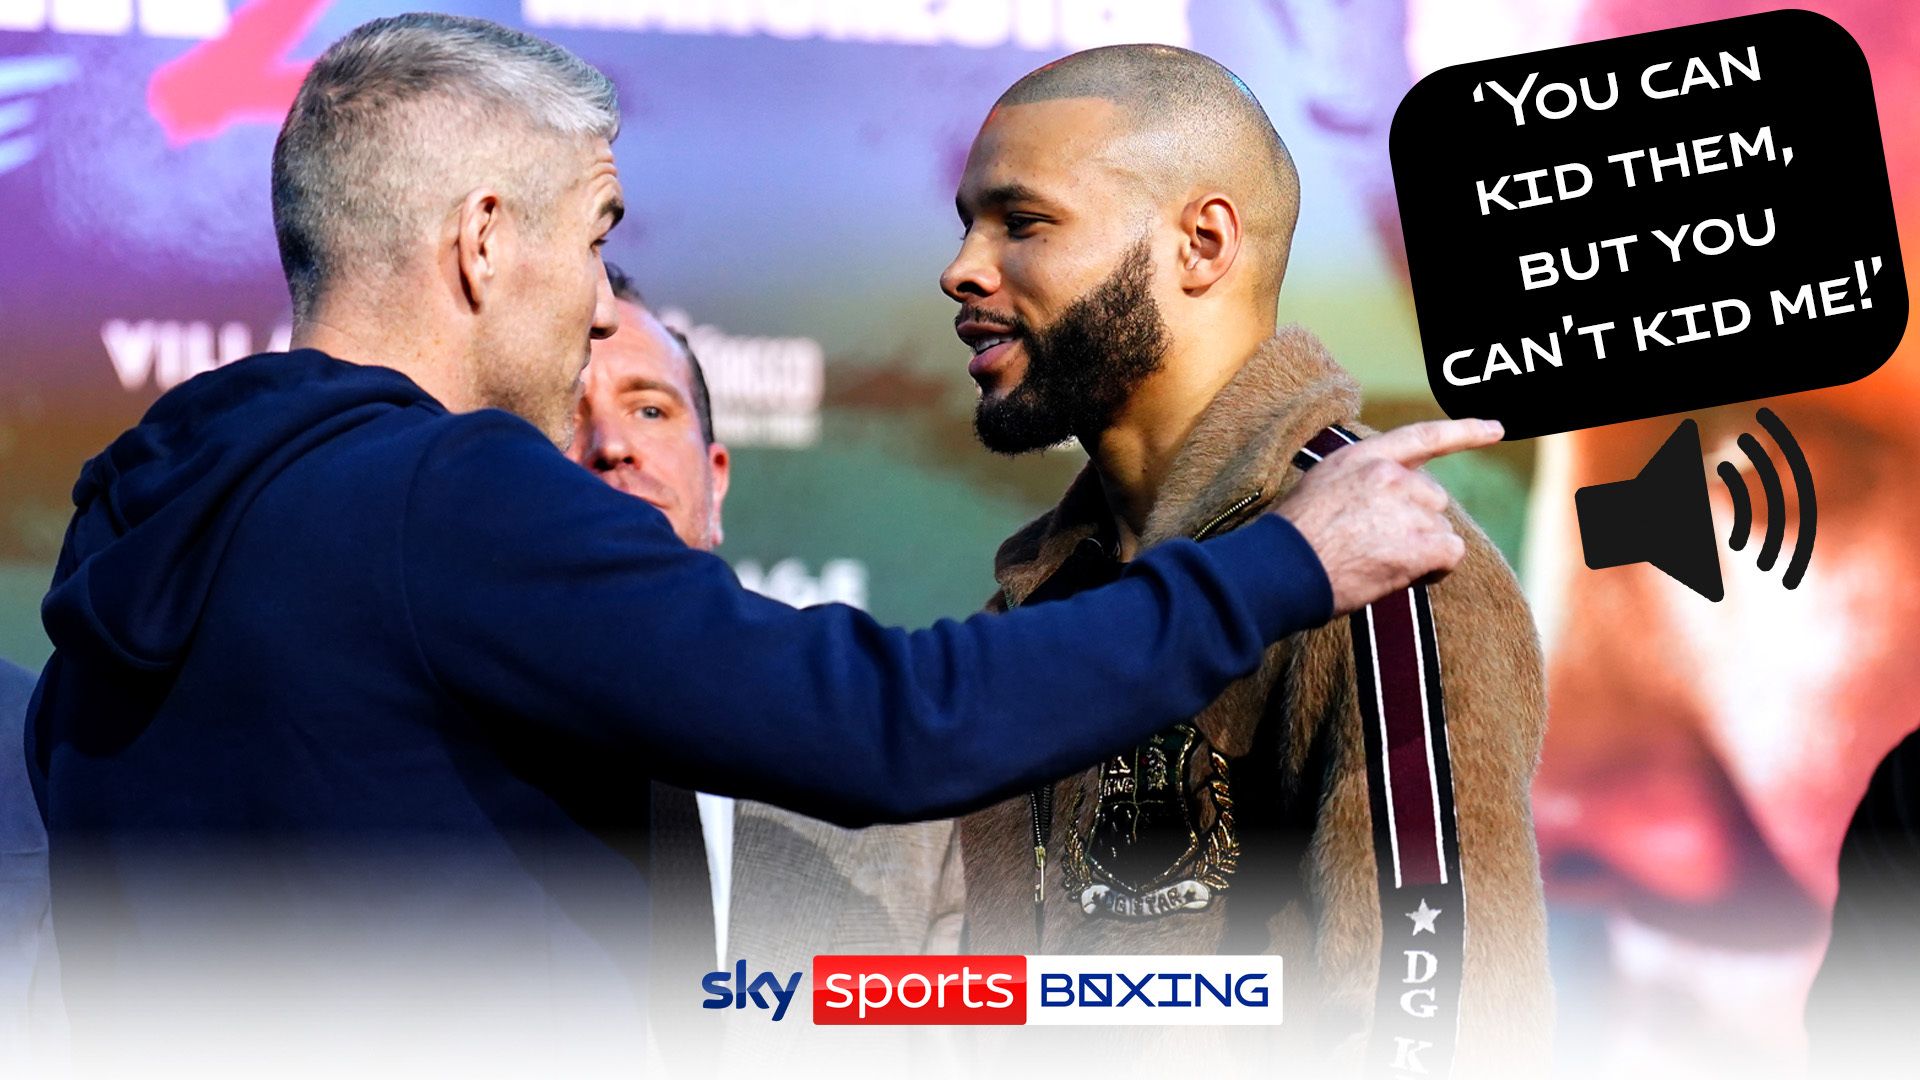 Mics on! Listen as things get heated between Smith and Eubank Jr during H2H